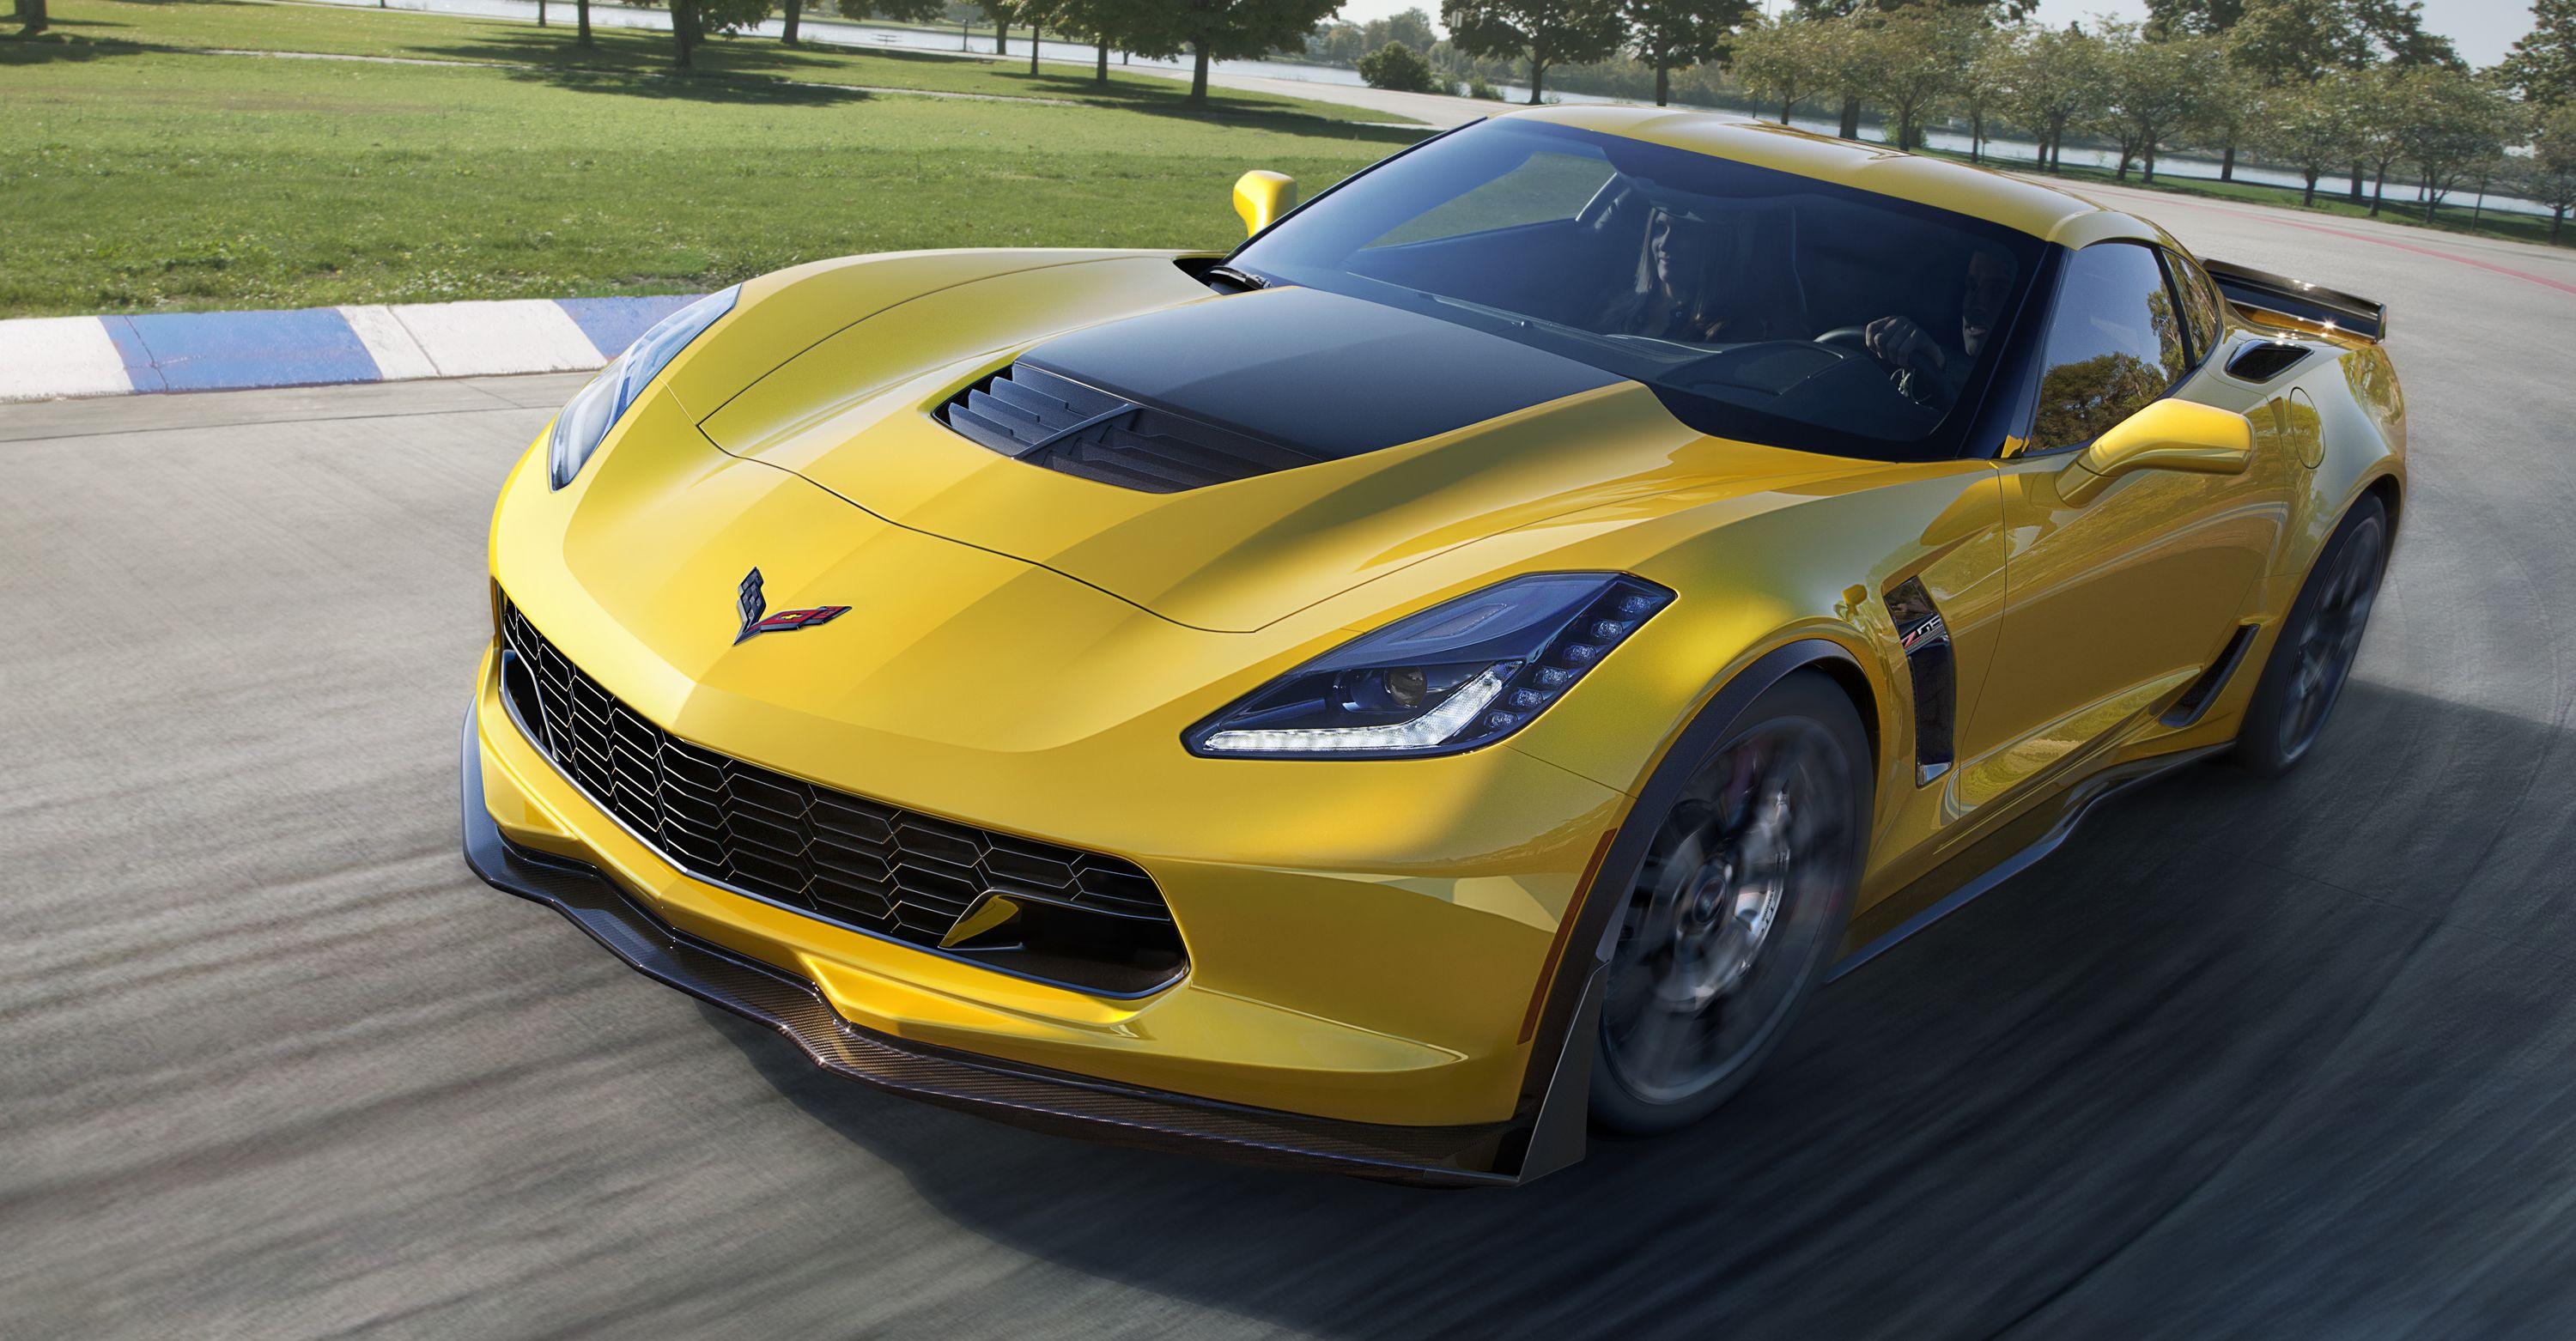 Chevy Corvette Z06 Performance Stats Released